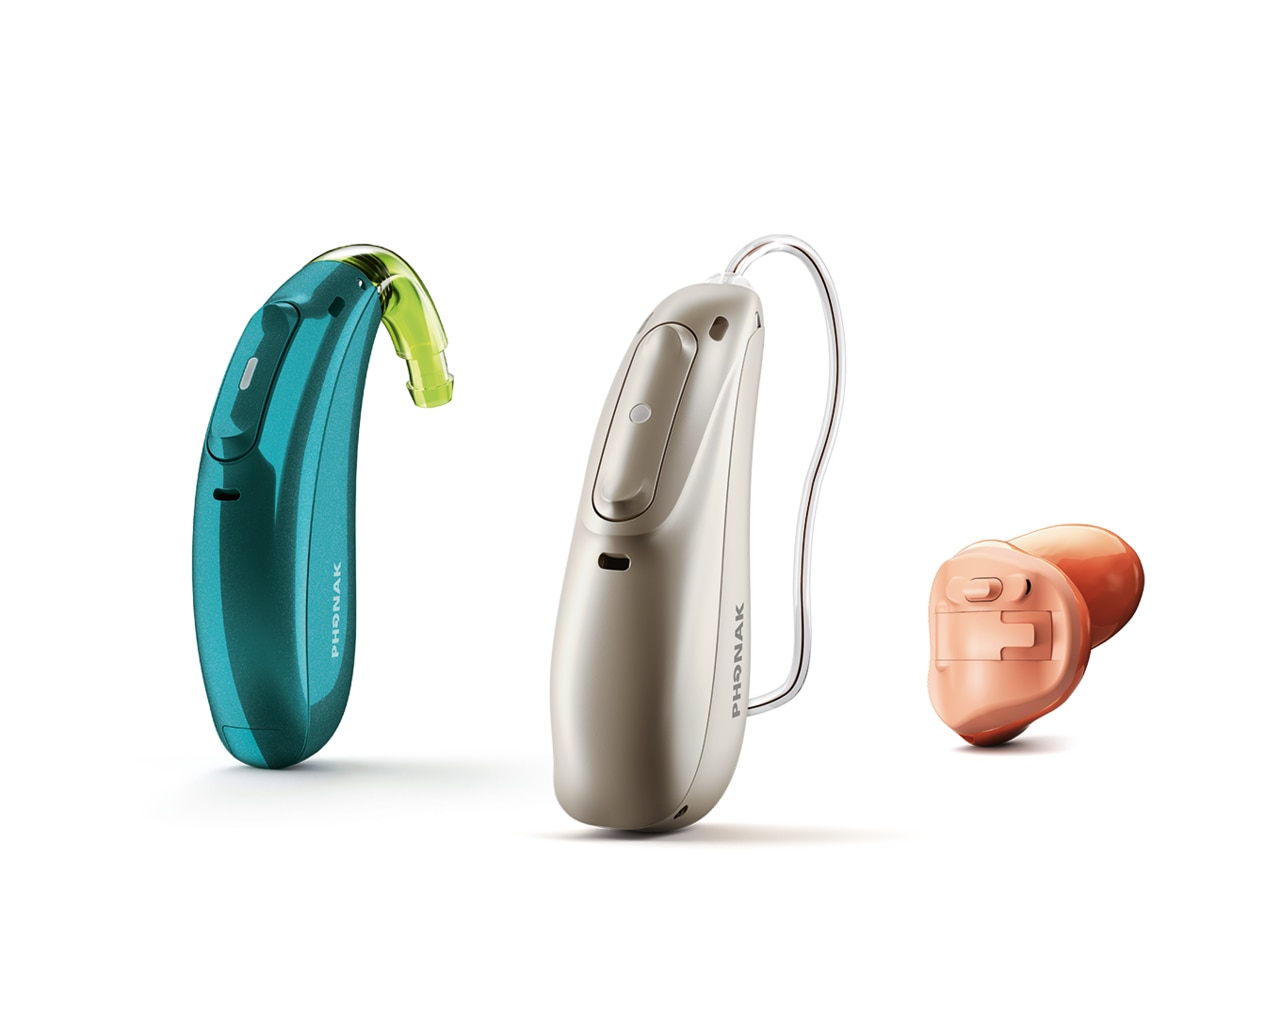 Three types of Phonak hearing aids: behind-the-ear,  receiver-in-the-canal and in-the-ear.